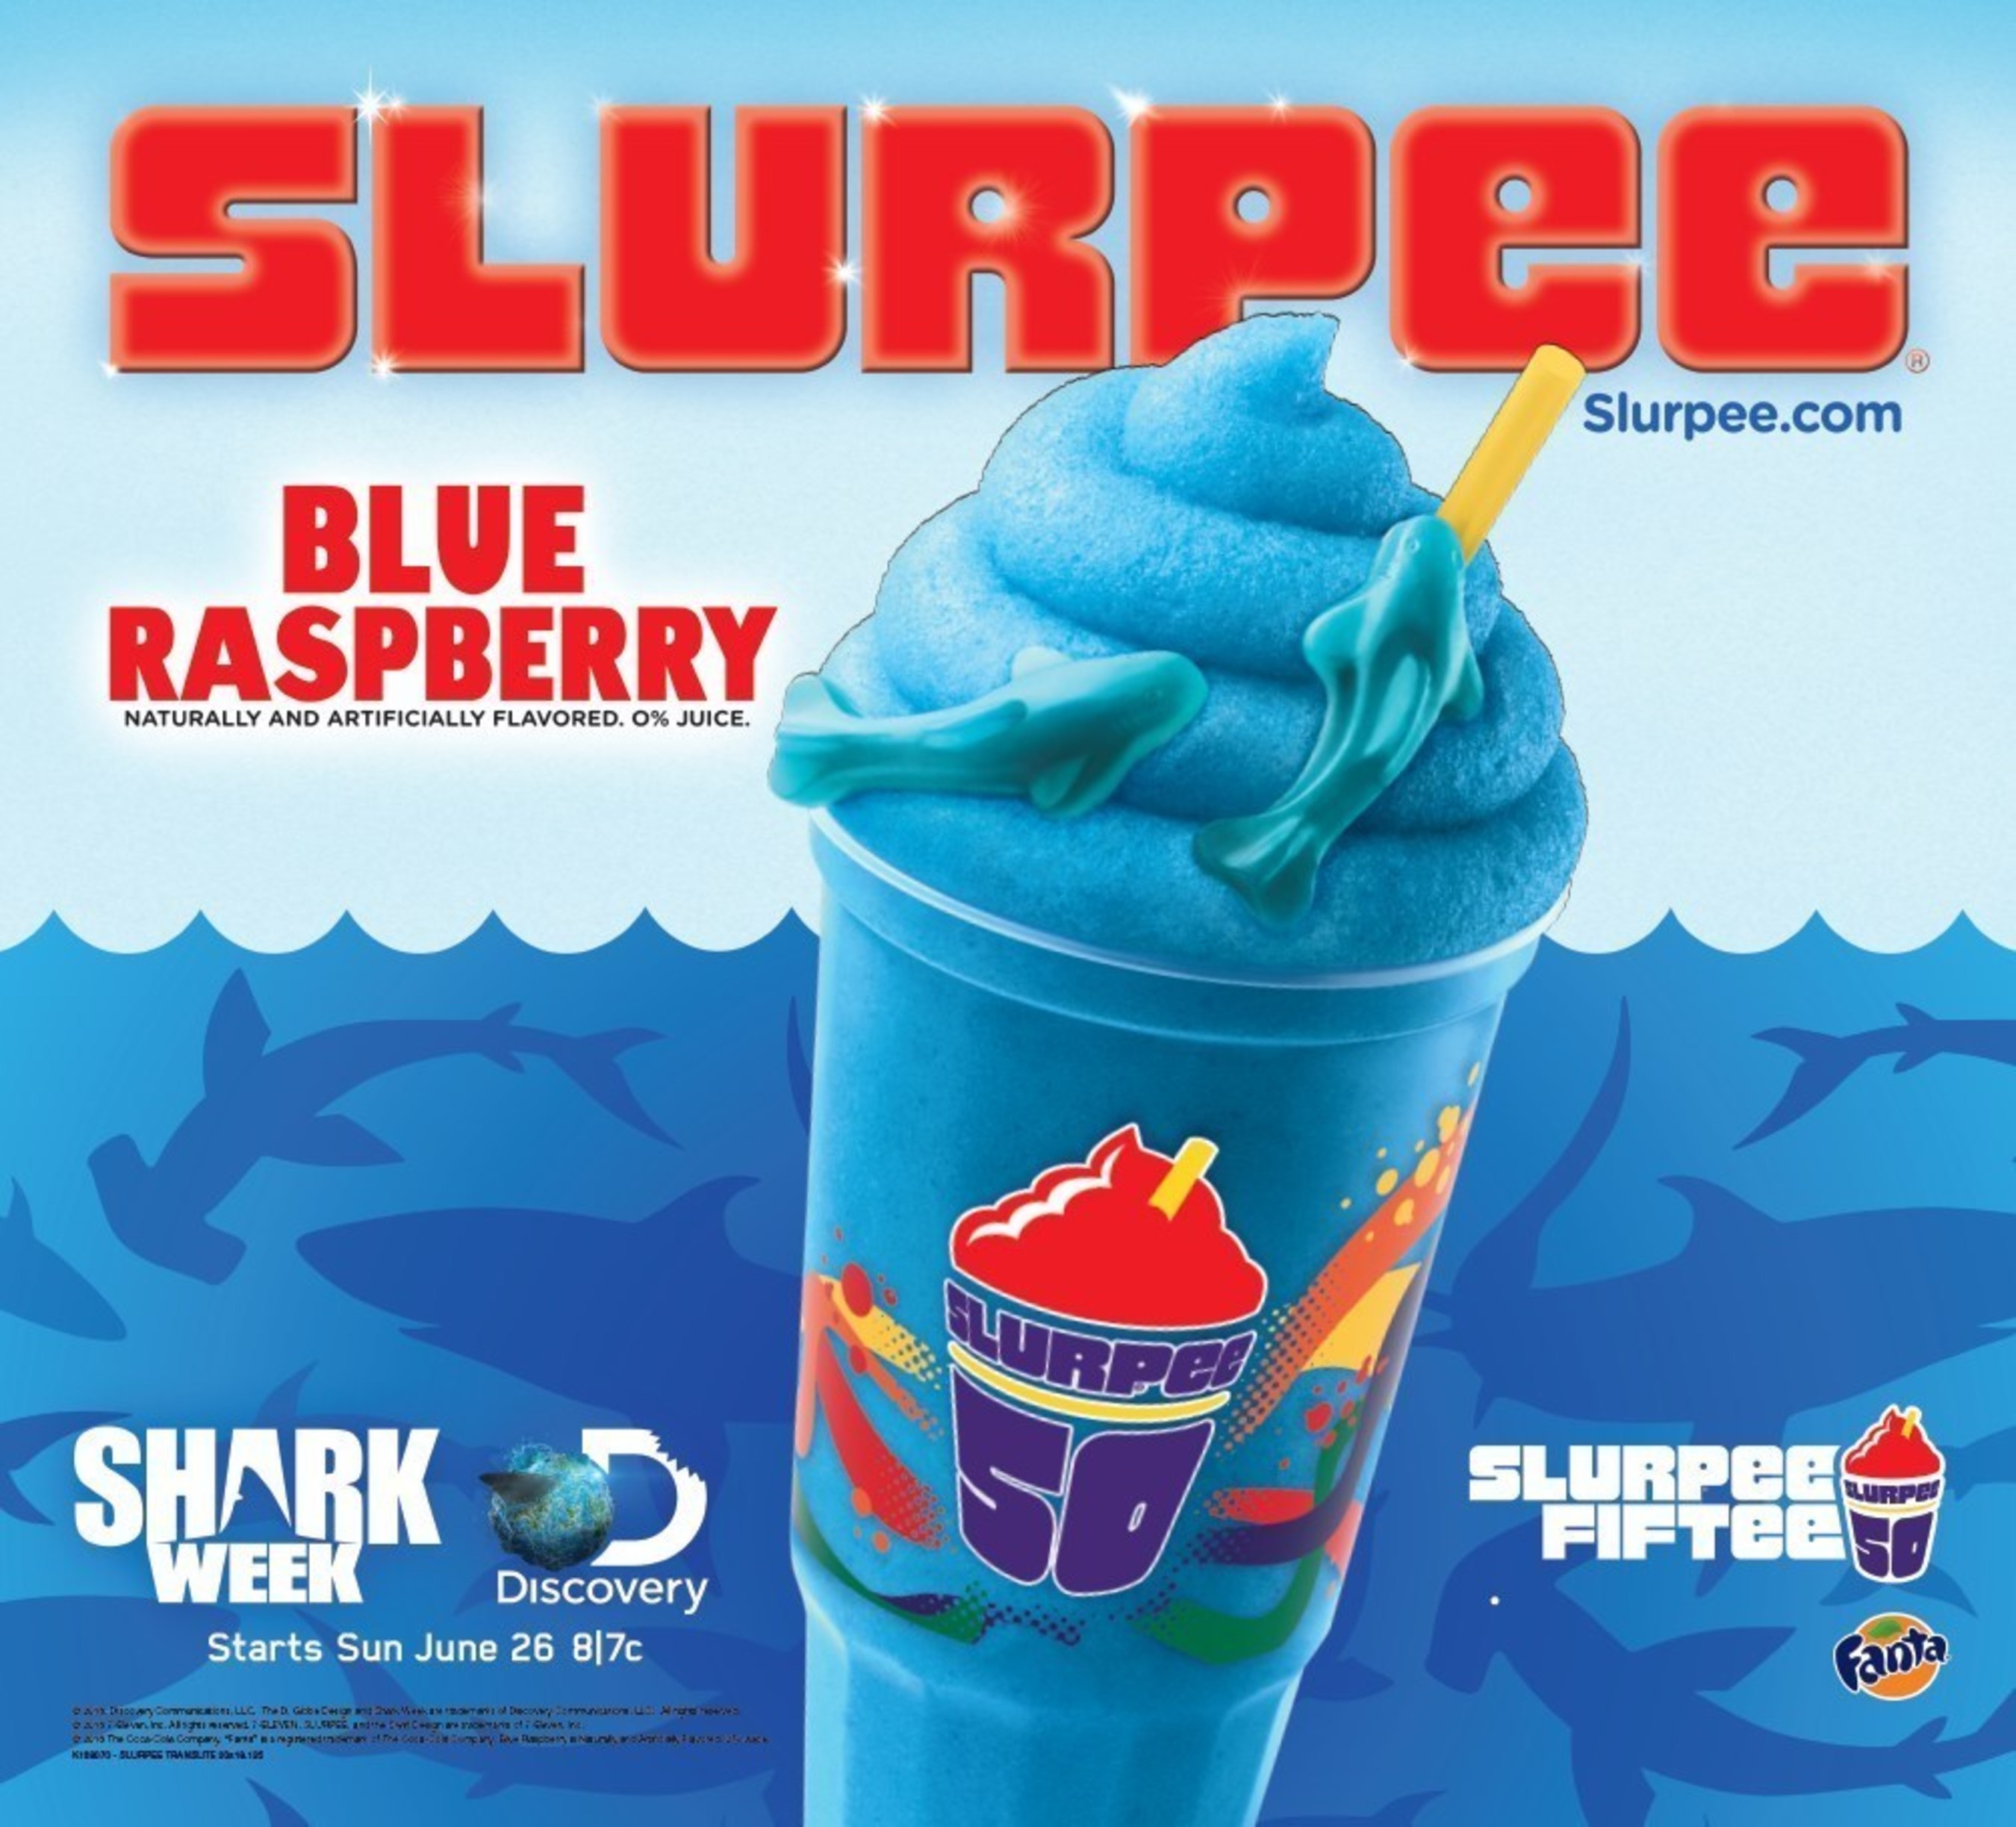 7-Eleven, Inc. is taking a bite out of Discovery Channel Shark Week with a tasty 8-week promotion including limited edition Shark Week swag.